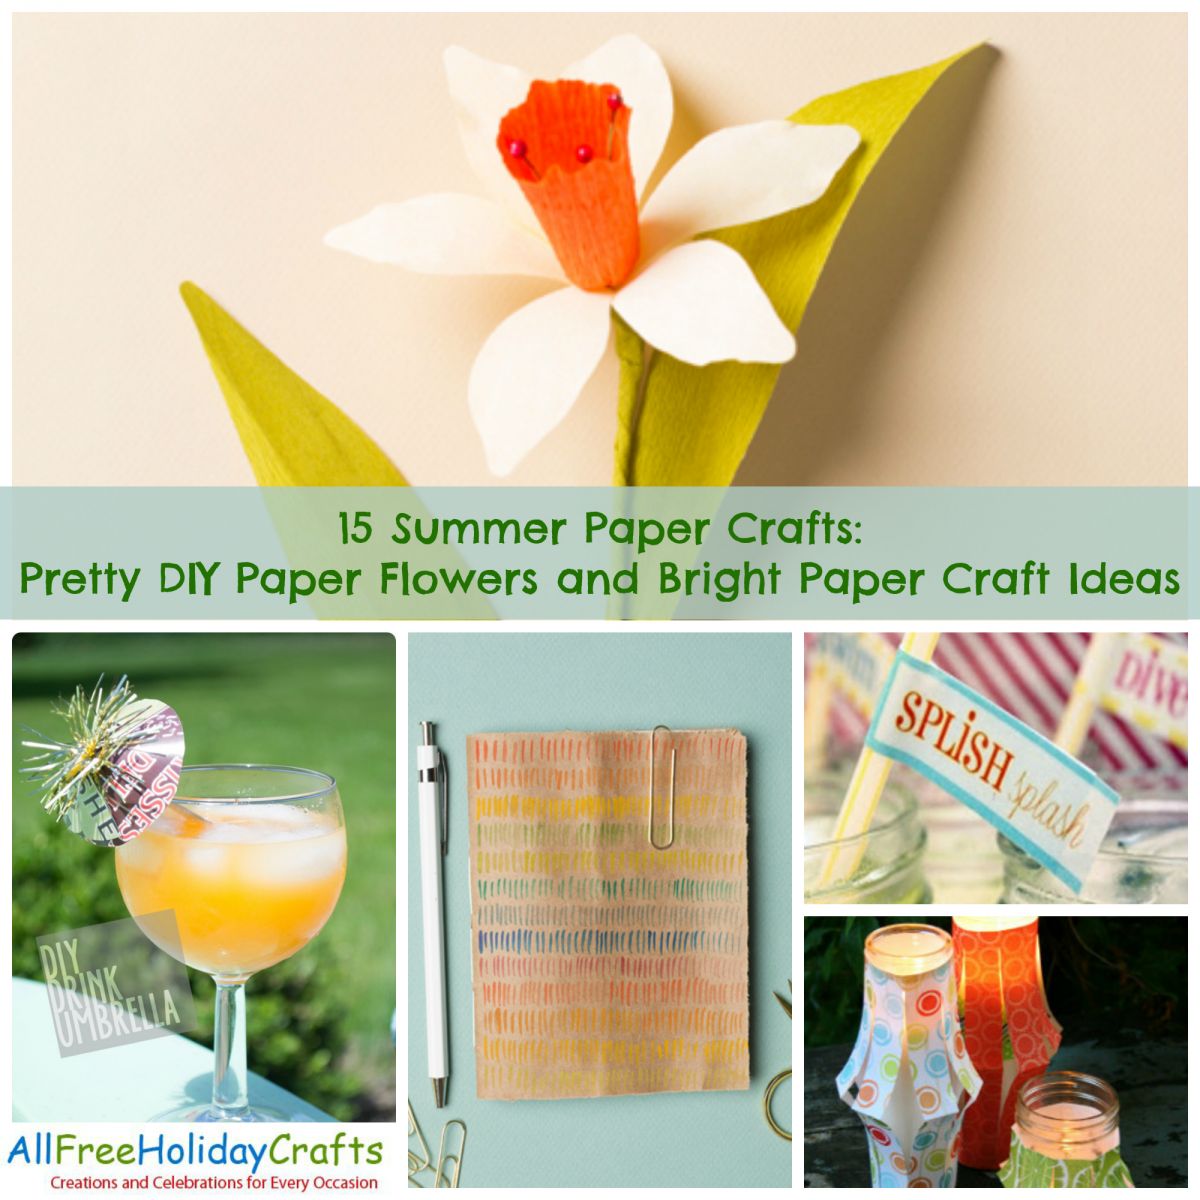 15 Summer Paper Crafts: Pretty DIY Paper Flowers and Bright Paper Craft Ideas